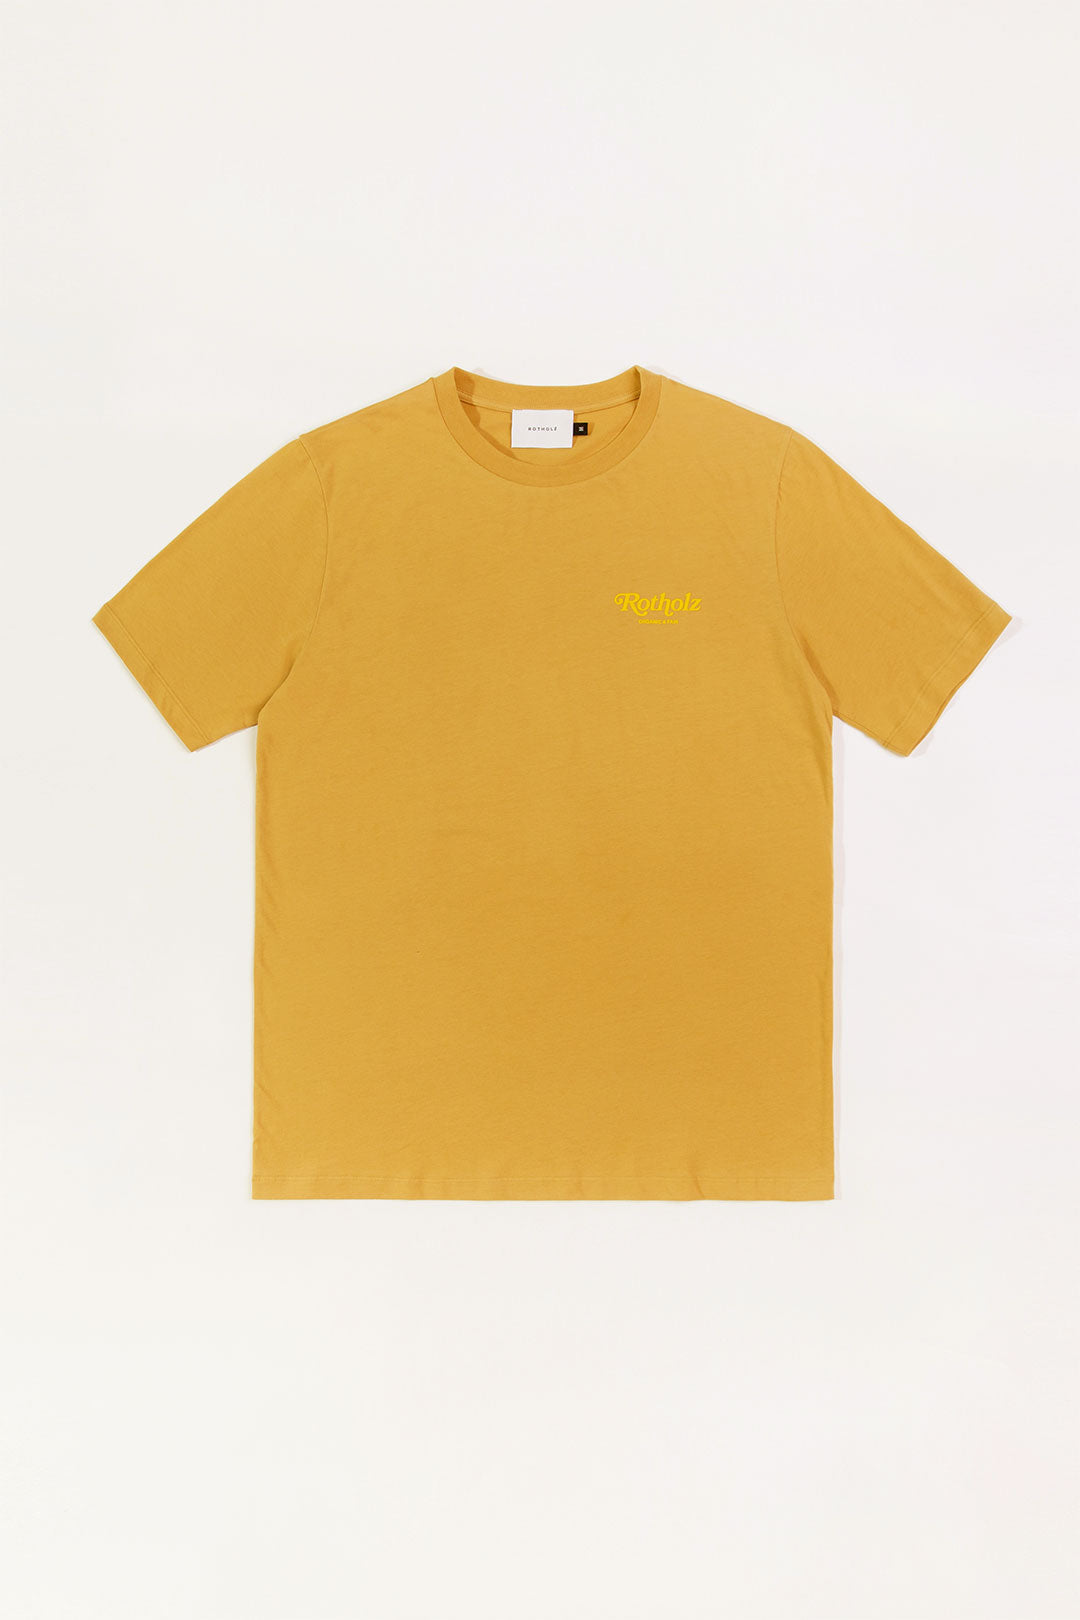 Yellow T-shirt Retro Logo made from 100% organic cotton from Rotholz